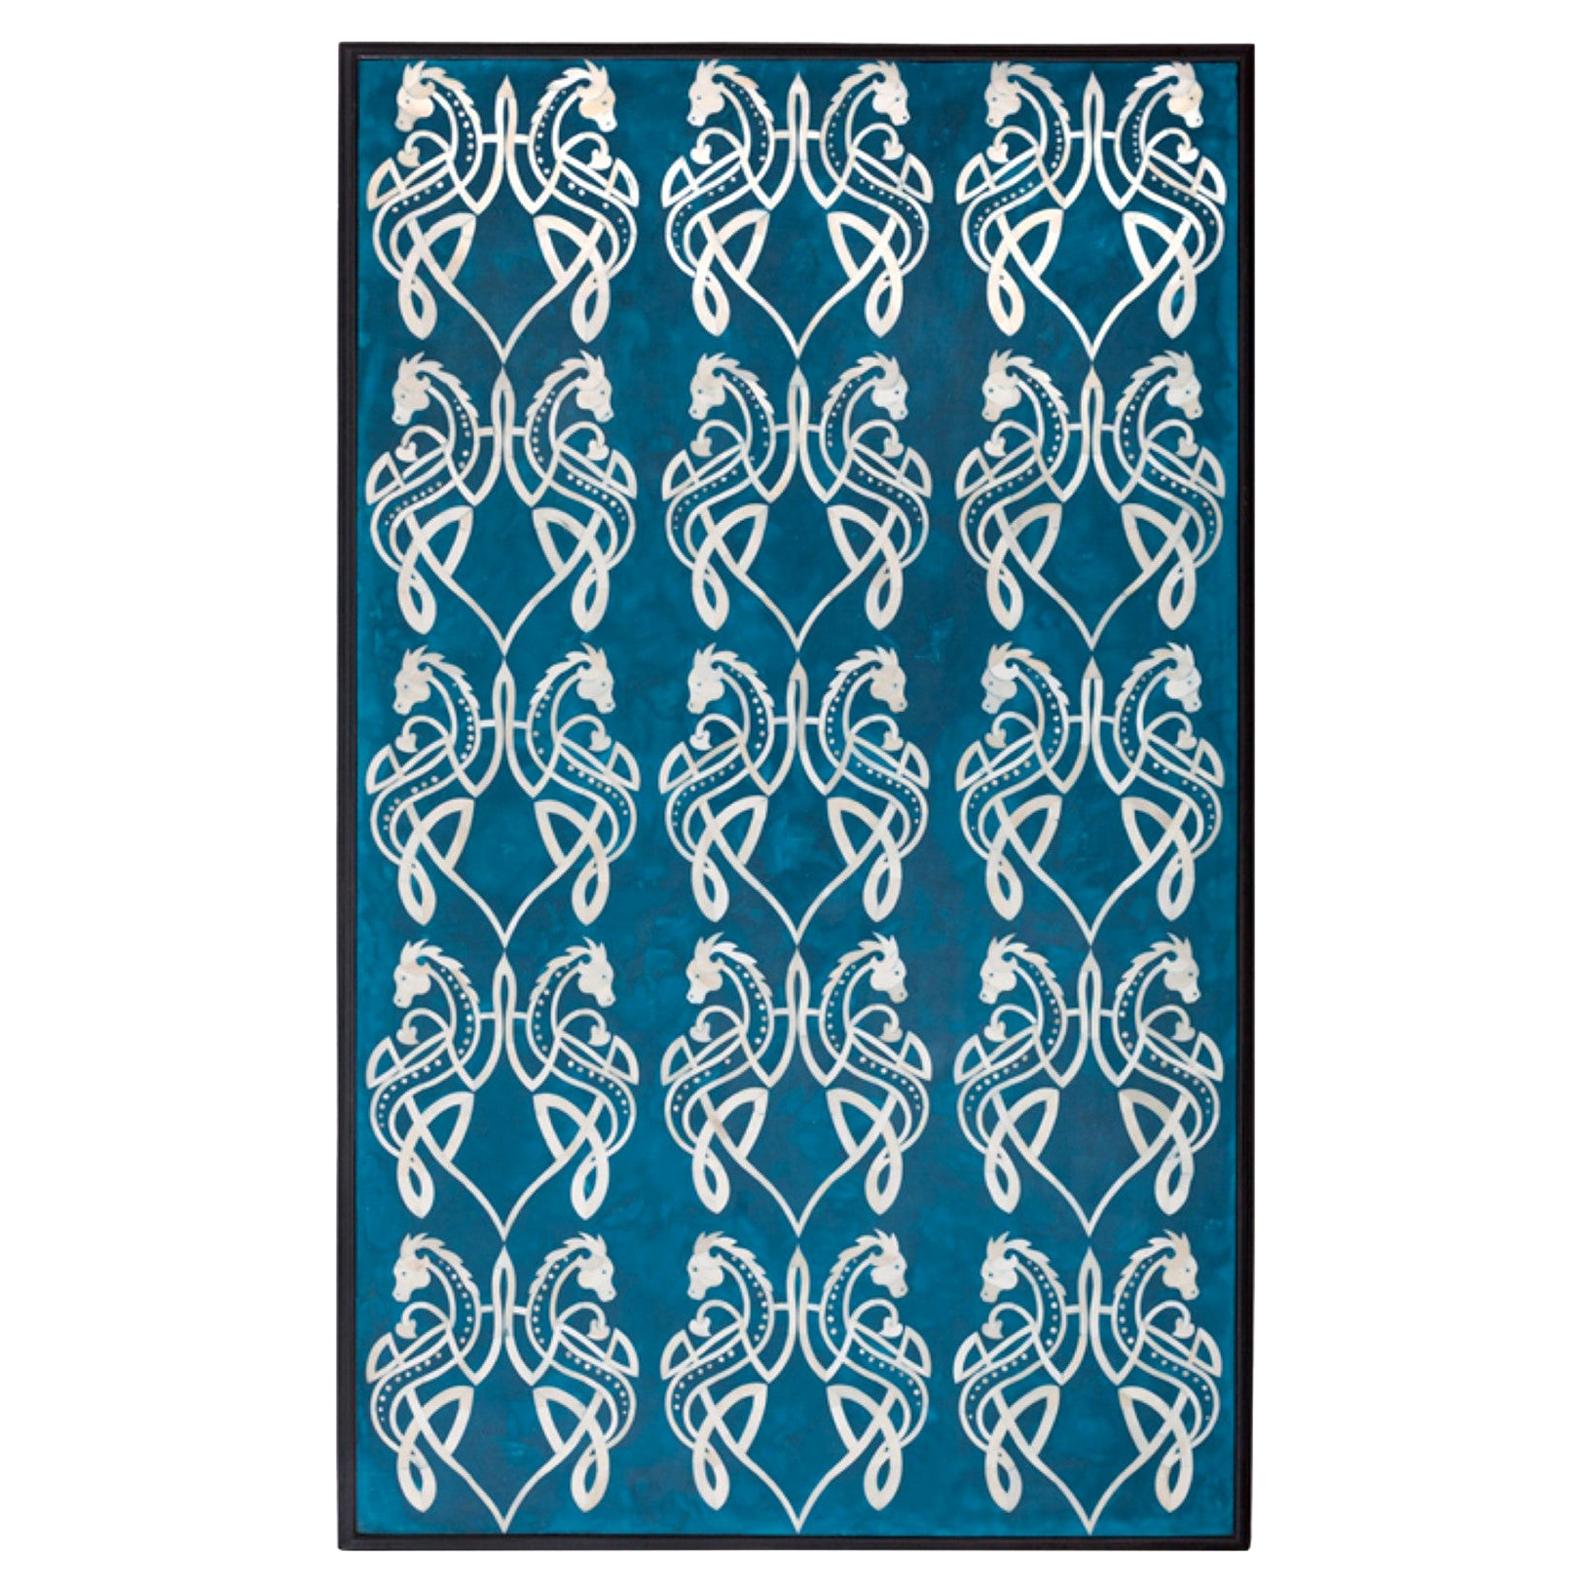 Bone Inlaid Wall Art in Blue Resin with Celtic Dragon Pattern